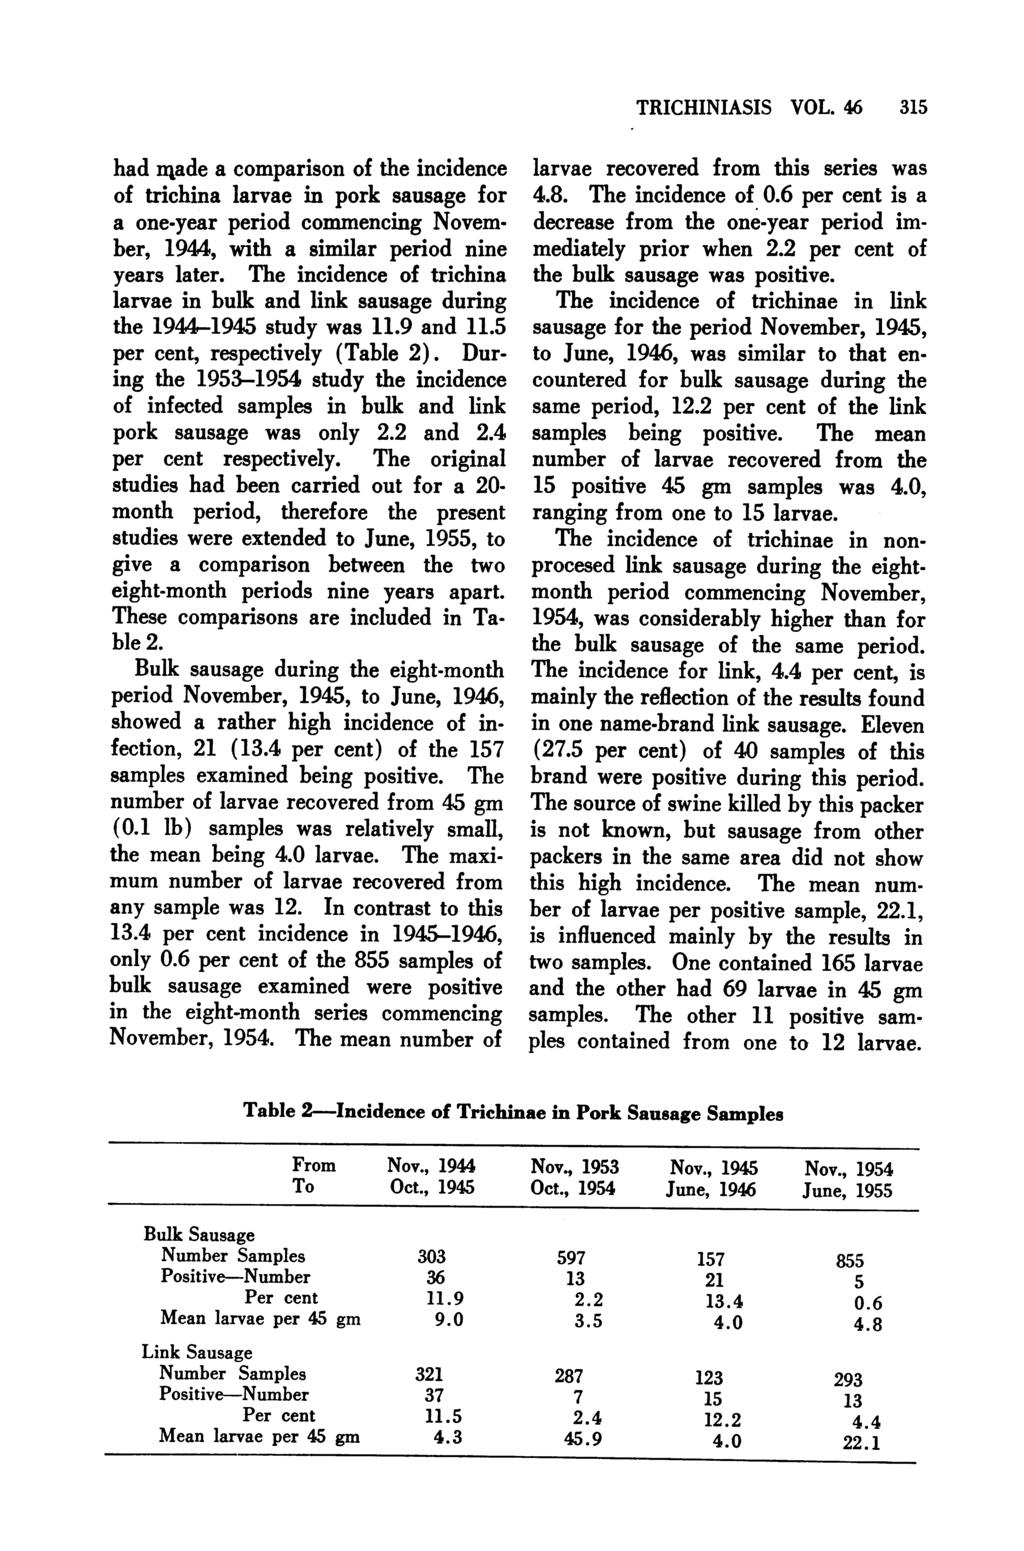 TRICHINIASIS VOL. 46 315 had nlade a comparison of the incidence of trichina larvae in pork sausage for a one-year period commencing November, 1944, with a similar period nine years later.